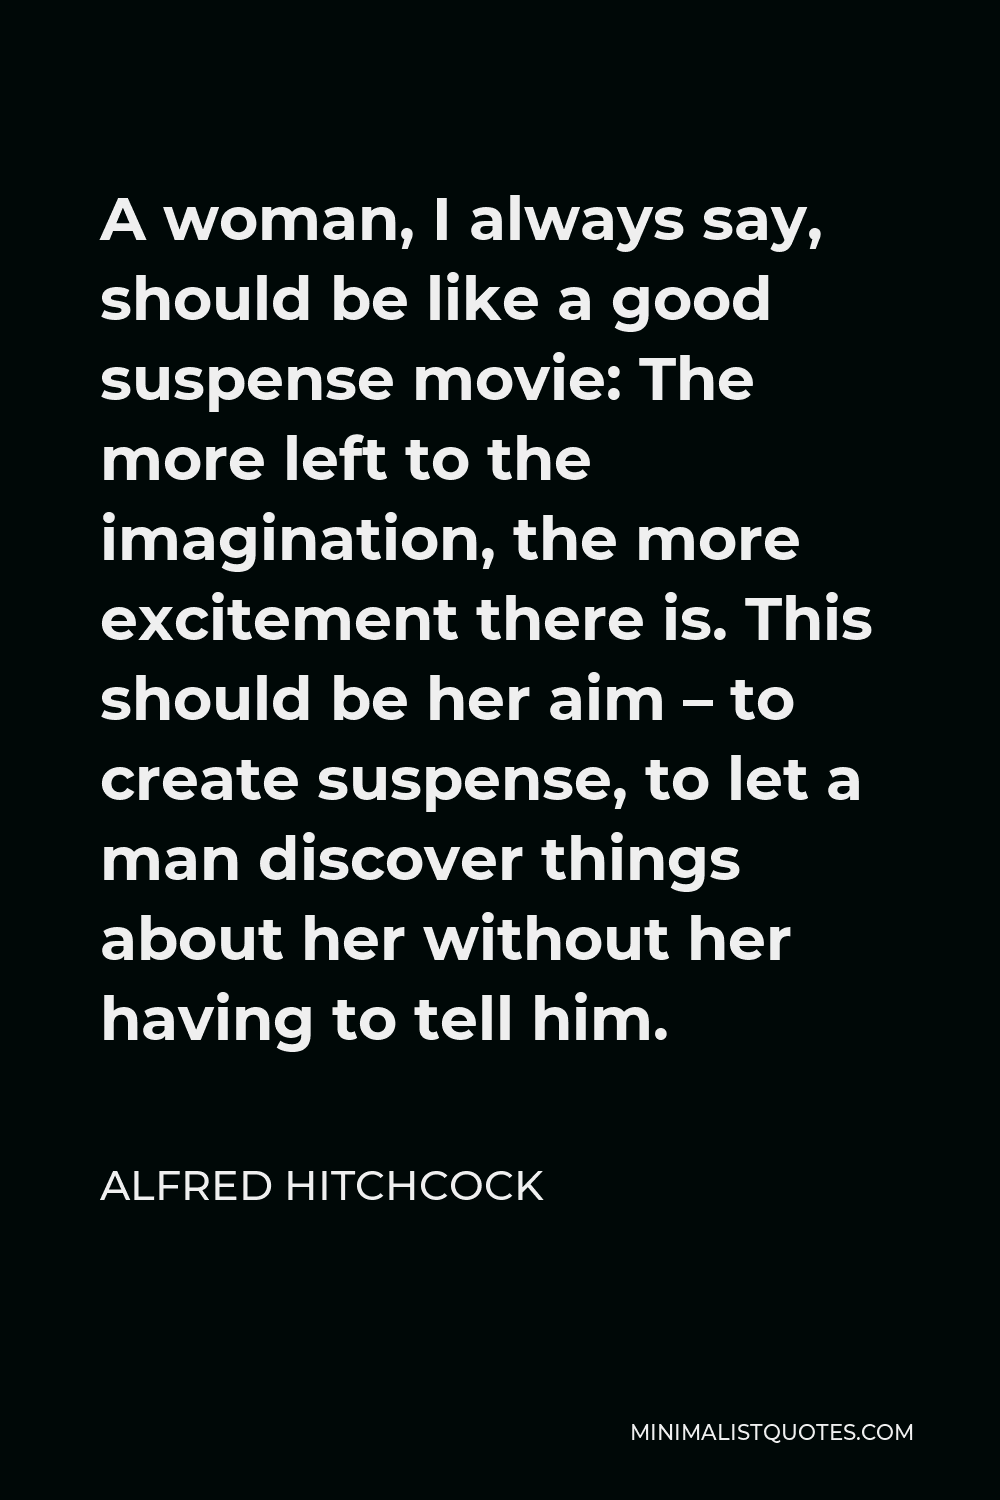 Alfred Hitchcock Quote - A woman, I always say, should be like a good suspense movie: The more left to the imagination, the more excitement there is. This should be her aim – to create suspense, to let a man discover things about her without her having to tell him.